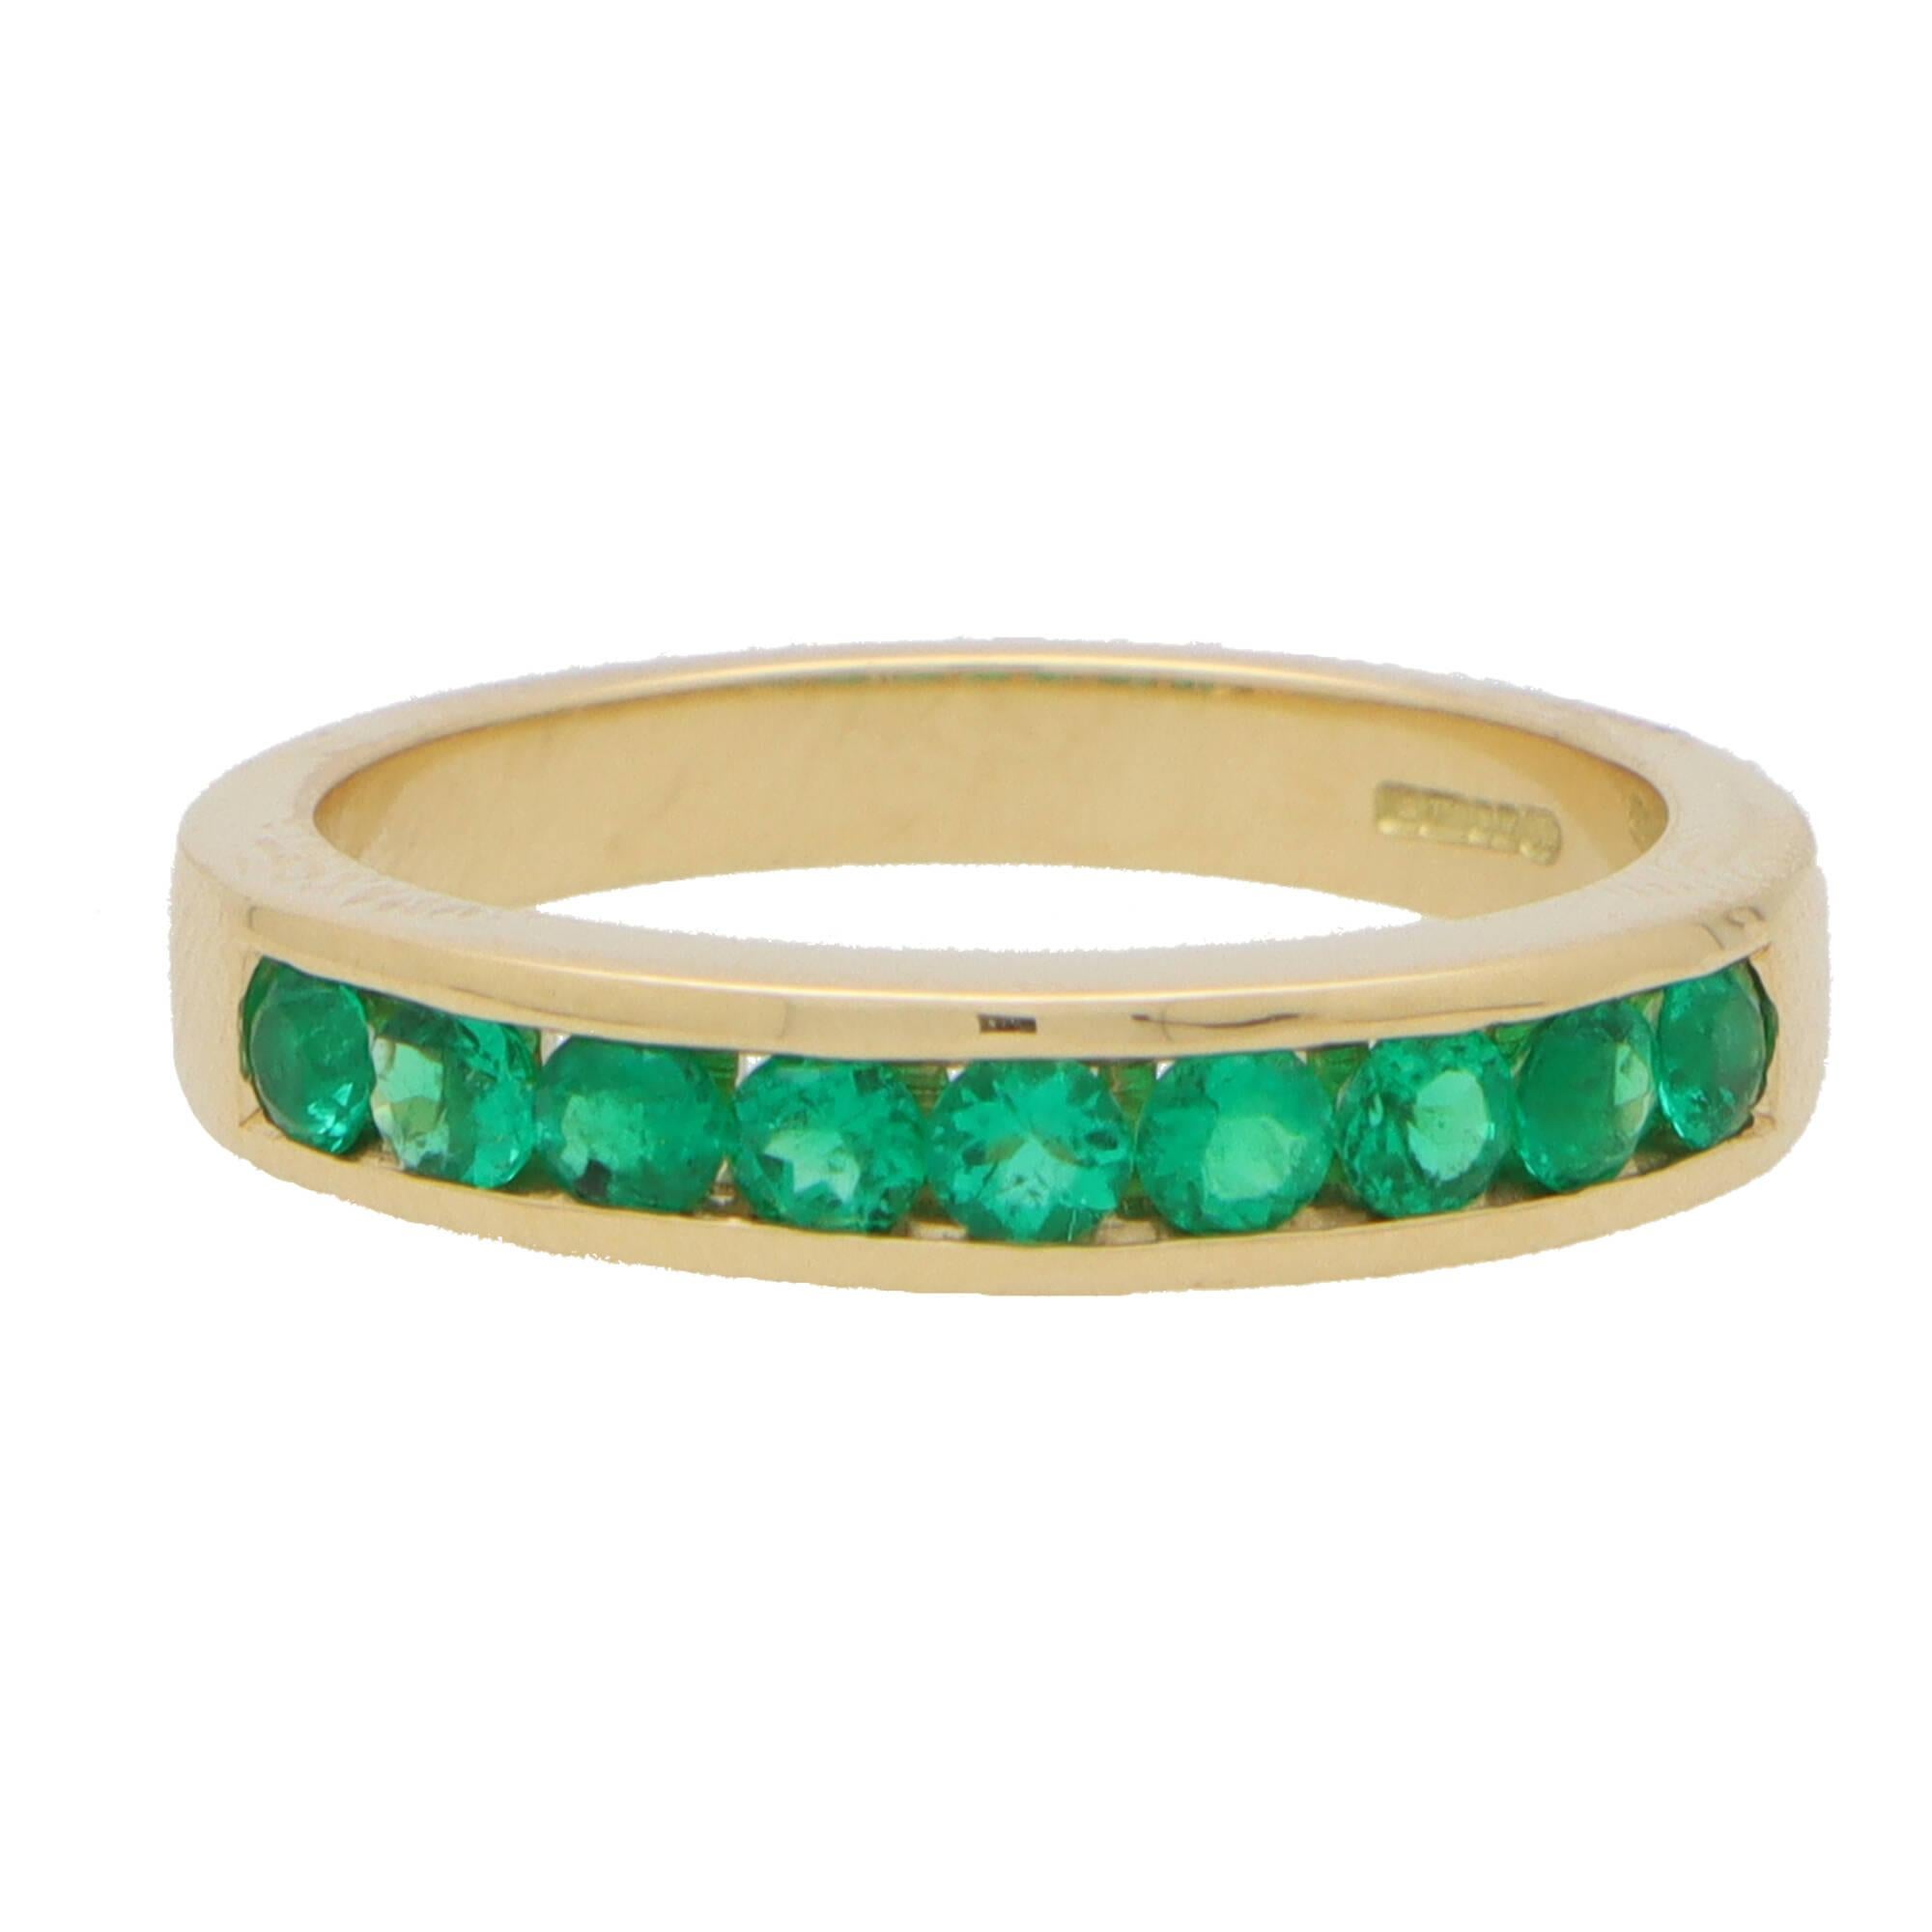 Emerald Channel Set Half Eternity Ring in 18k Yellow Gold